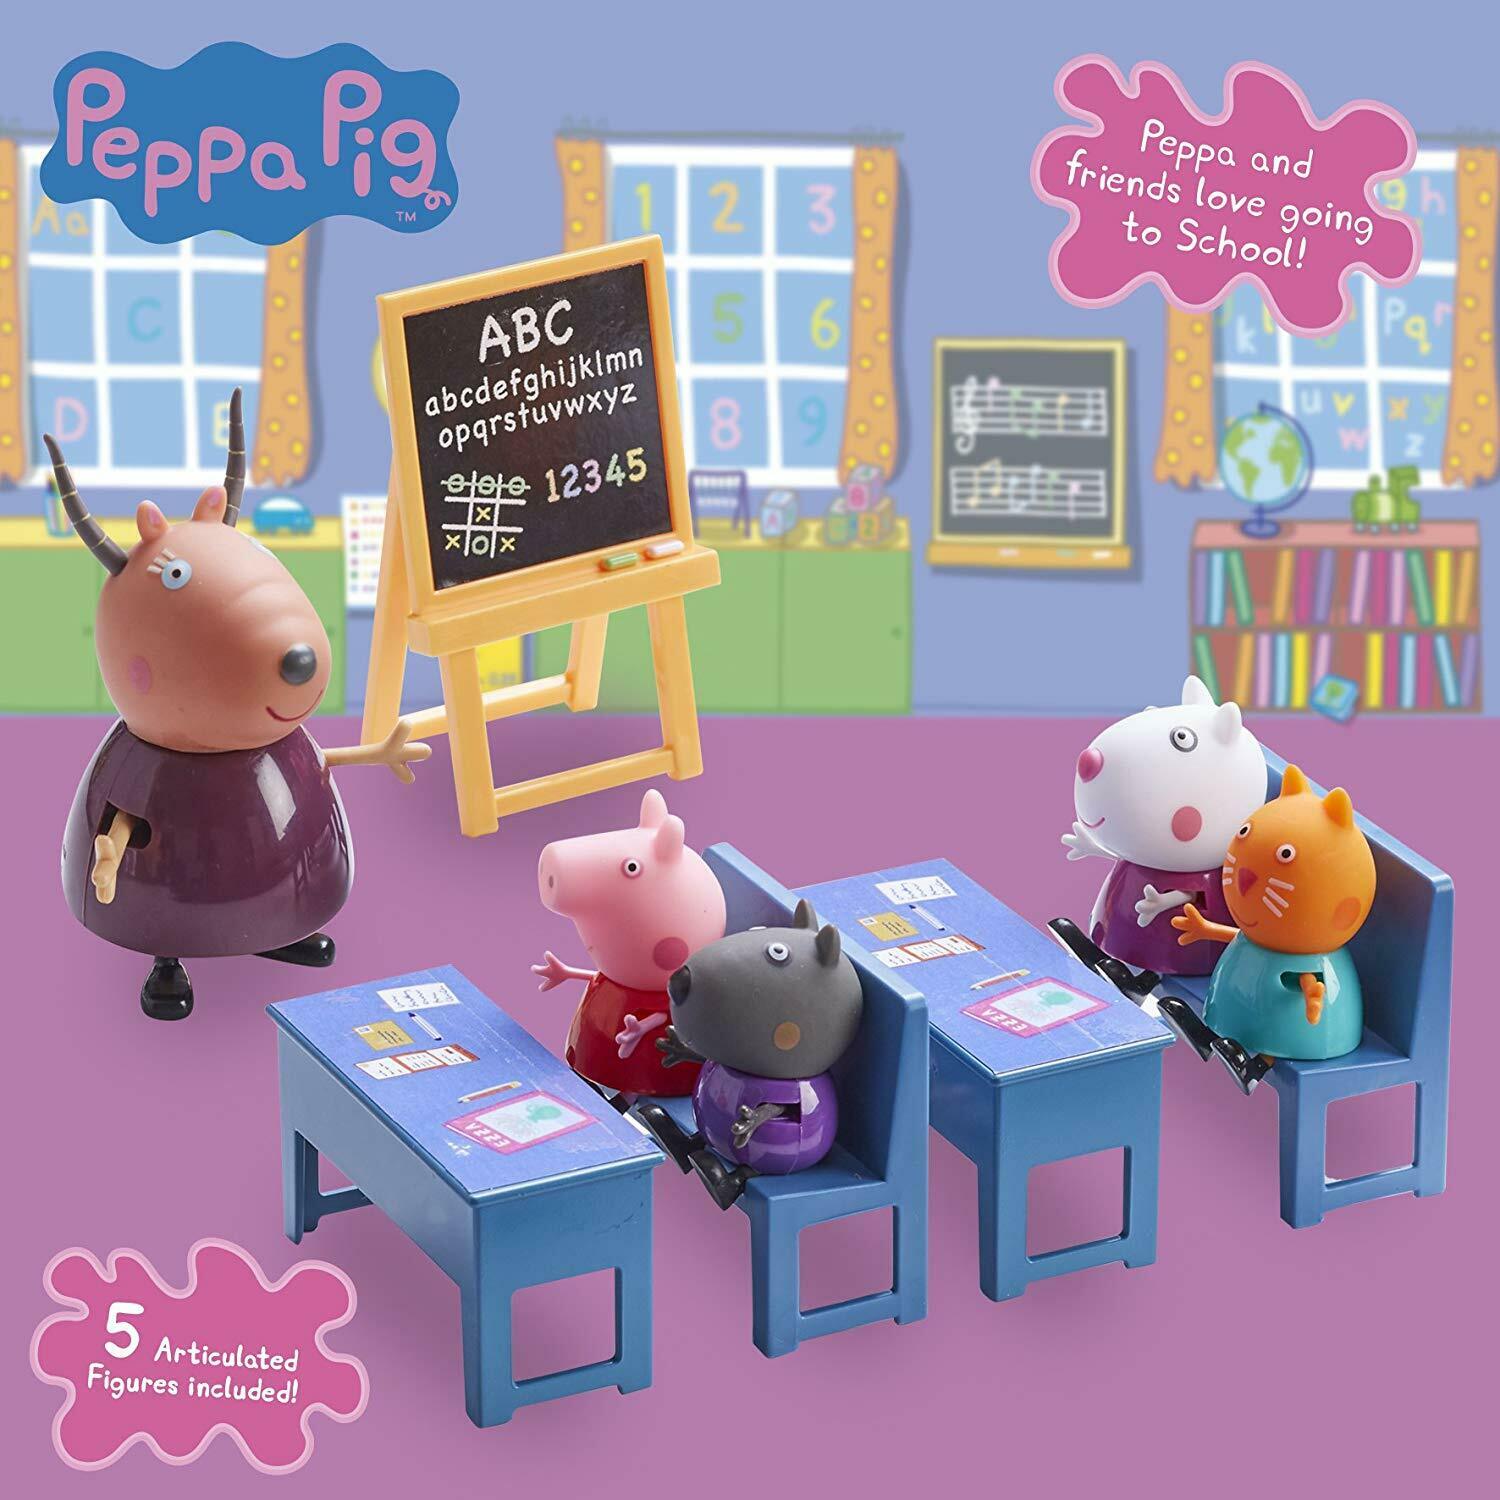 05033 Peppa Pig School Classroom Playset with 5 Figures and Desks! Age 3+